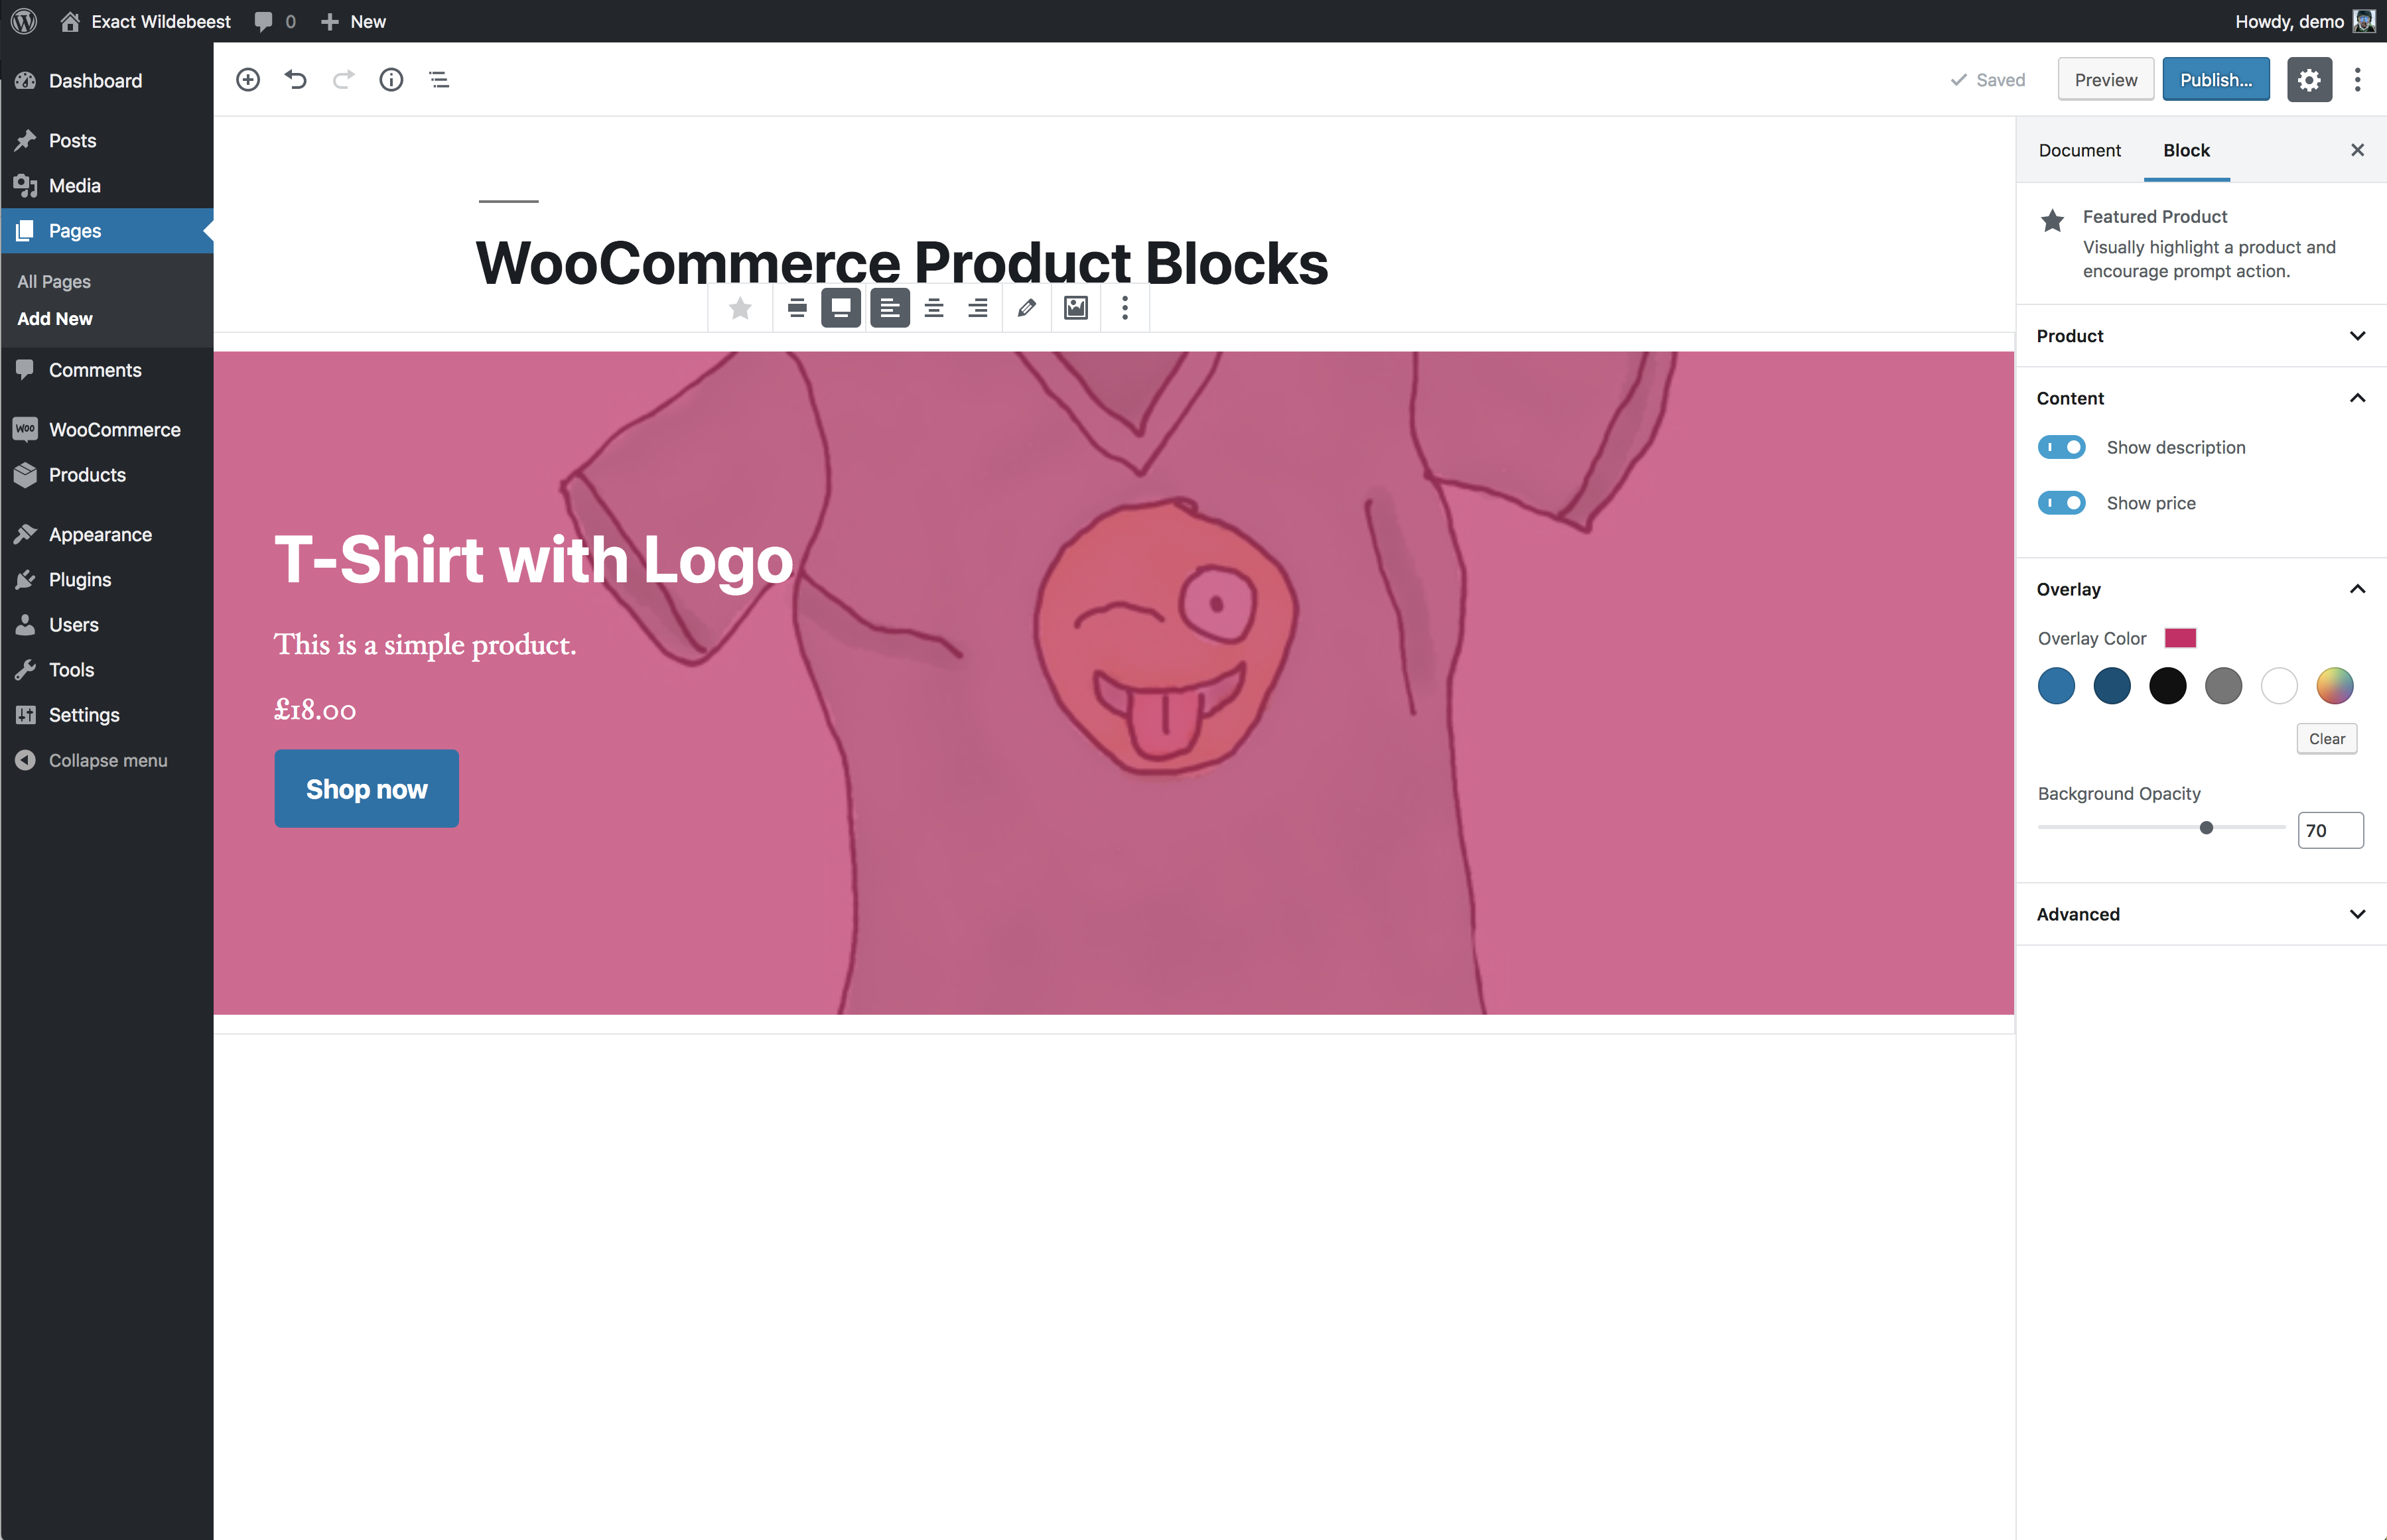 The new interface of the WooCommerce product blocks delivers an accurate preview of how that selection will look once published.